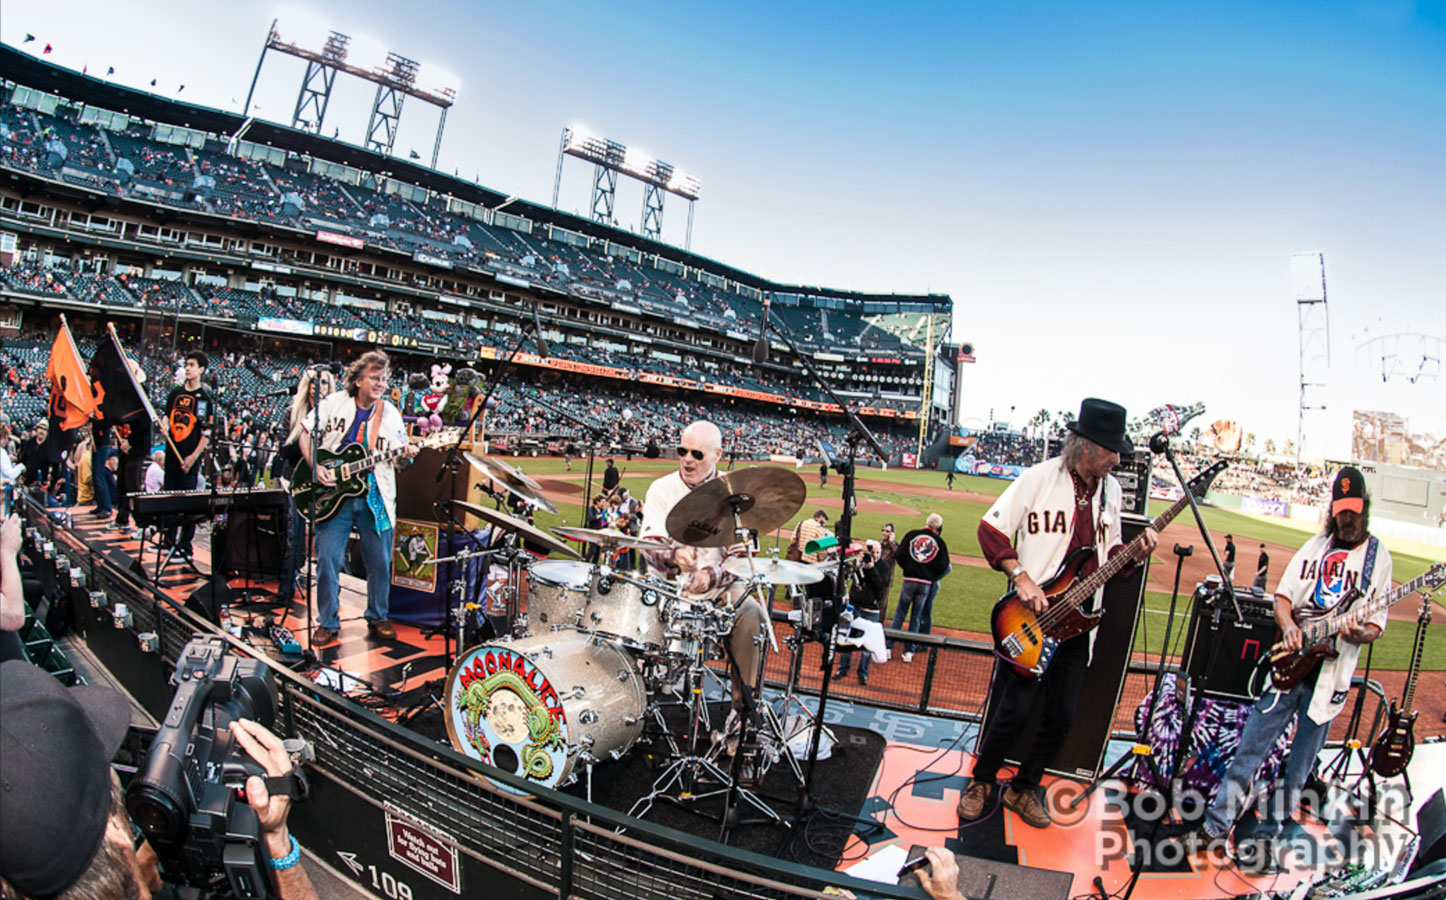 Moonalice (SF Giants AT&T Park for Jerry Garcia's 70th Birthday Celebration) photo by Bob Minkin Photography 2012